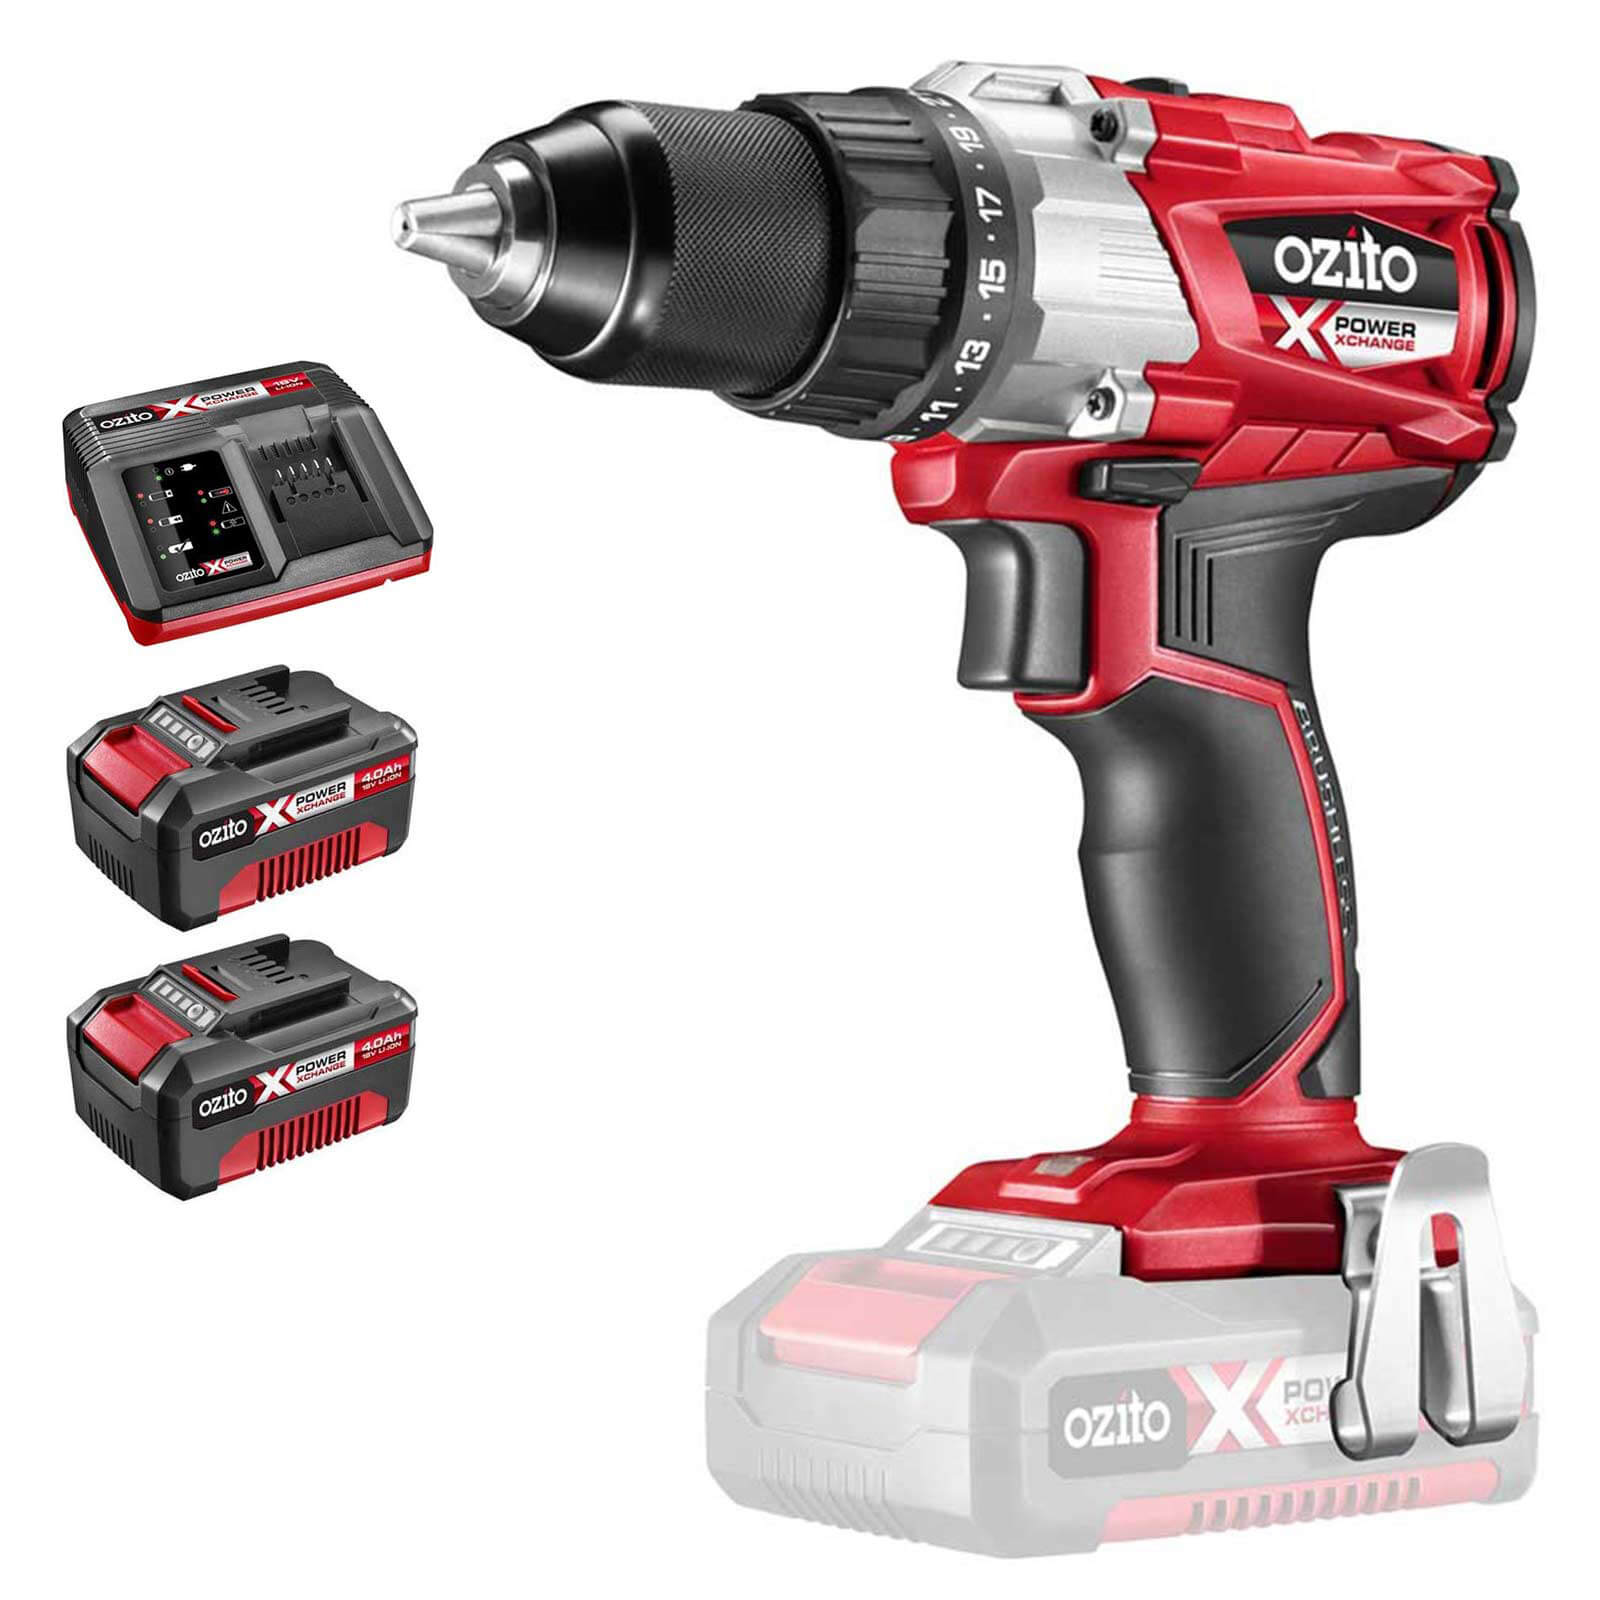 Ozito Pxbds 18v Cordless Brushless Drill Driver 2 X 4ah Li Ion Charger No Case